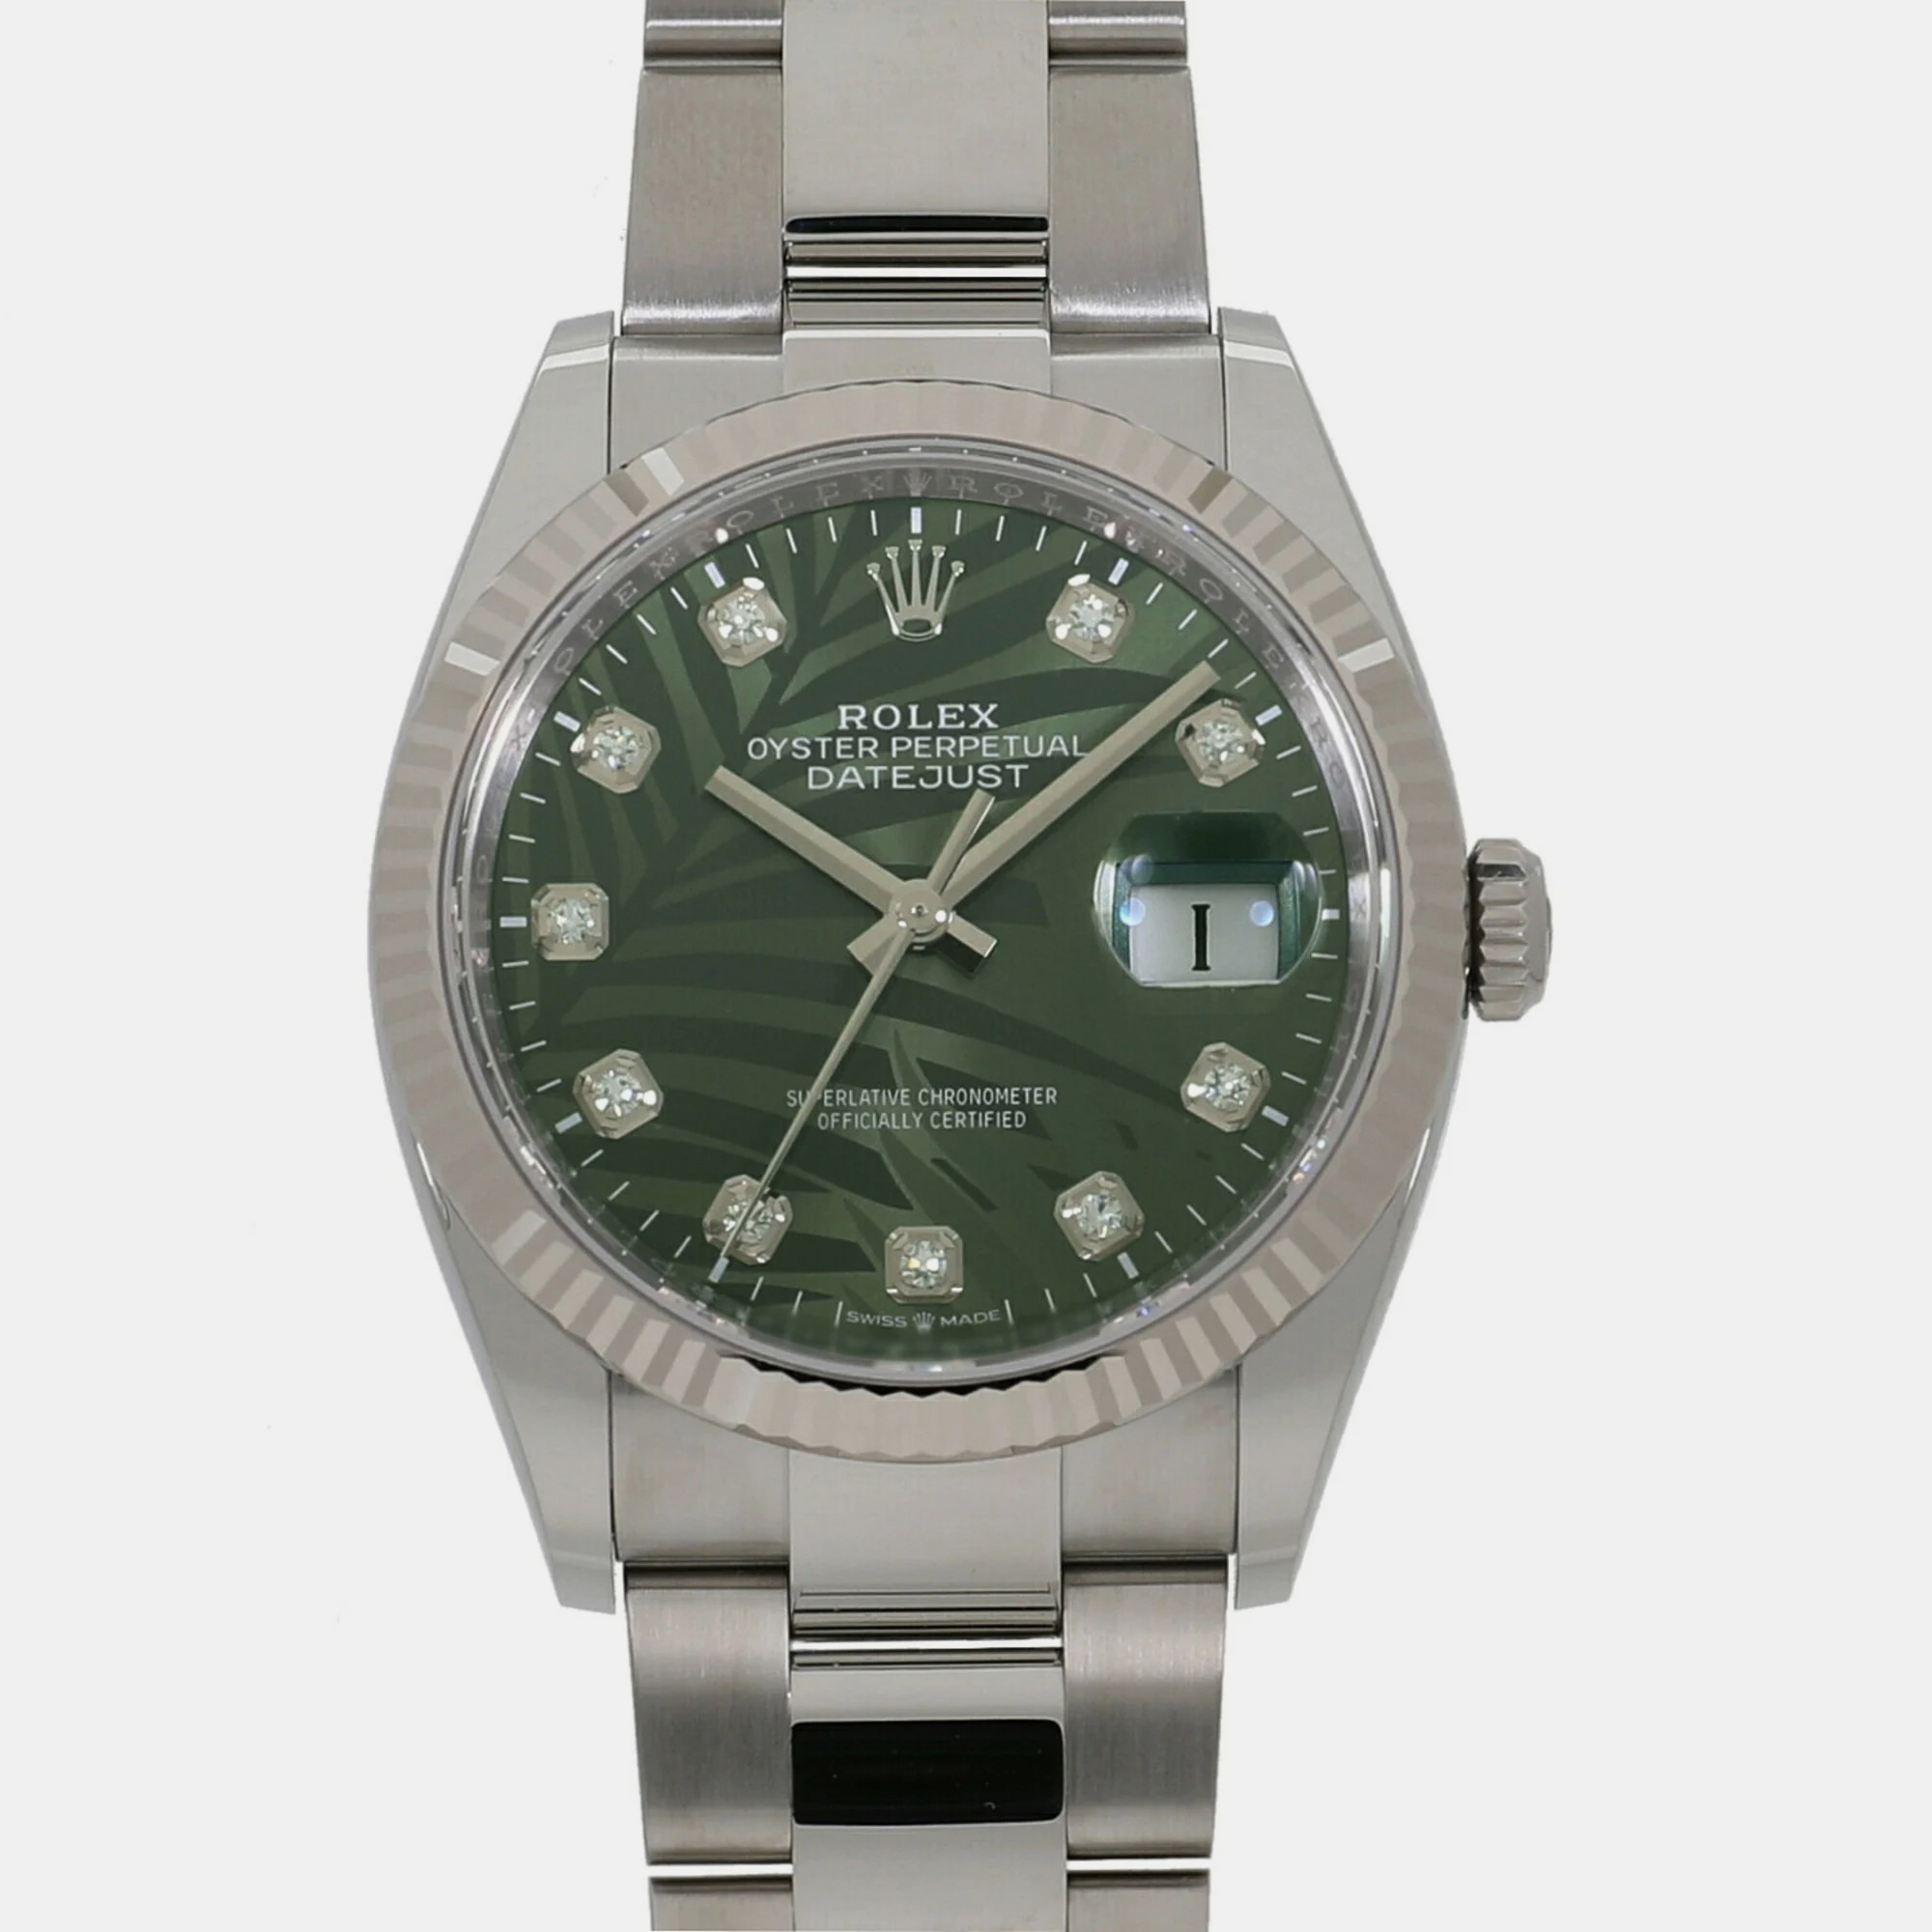 Rolex Green Diamond 18k White Gold And Stainless Steel Datejust 126234 Automatic Men's Wristwatch 36 Mm